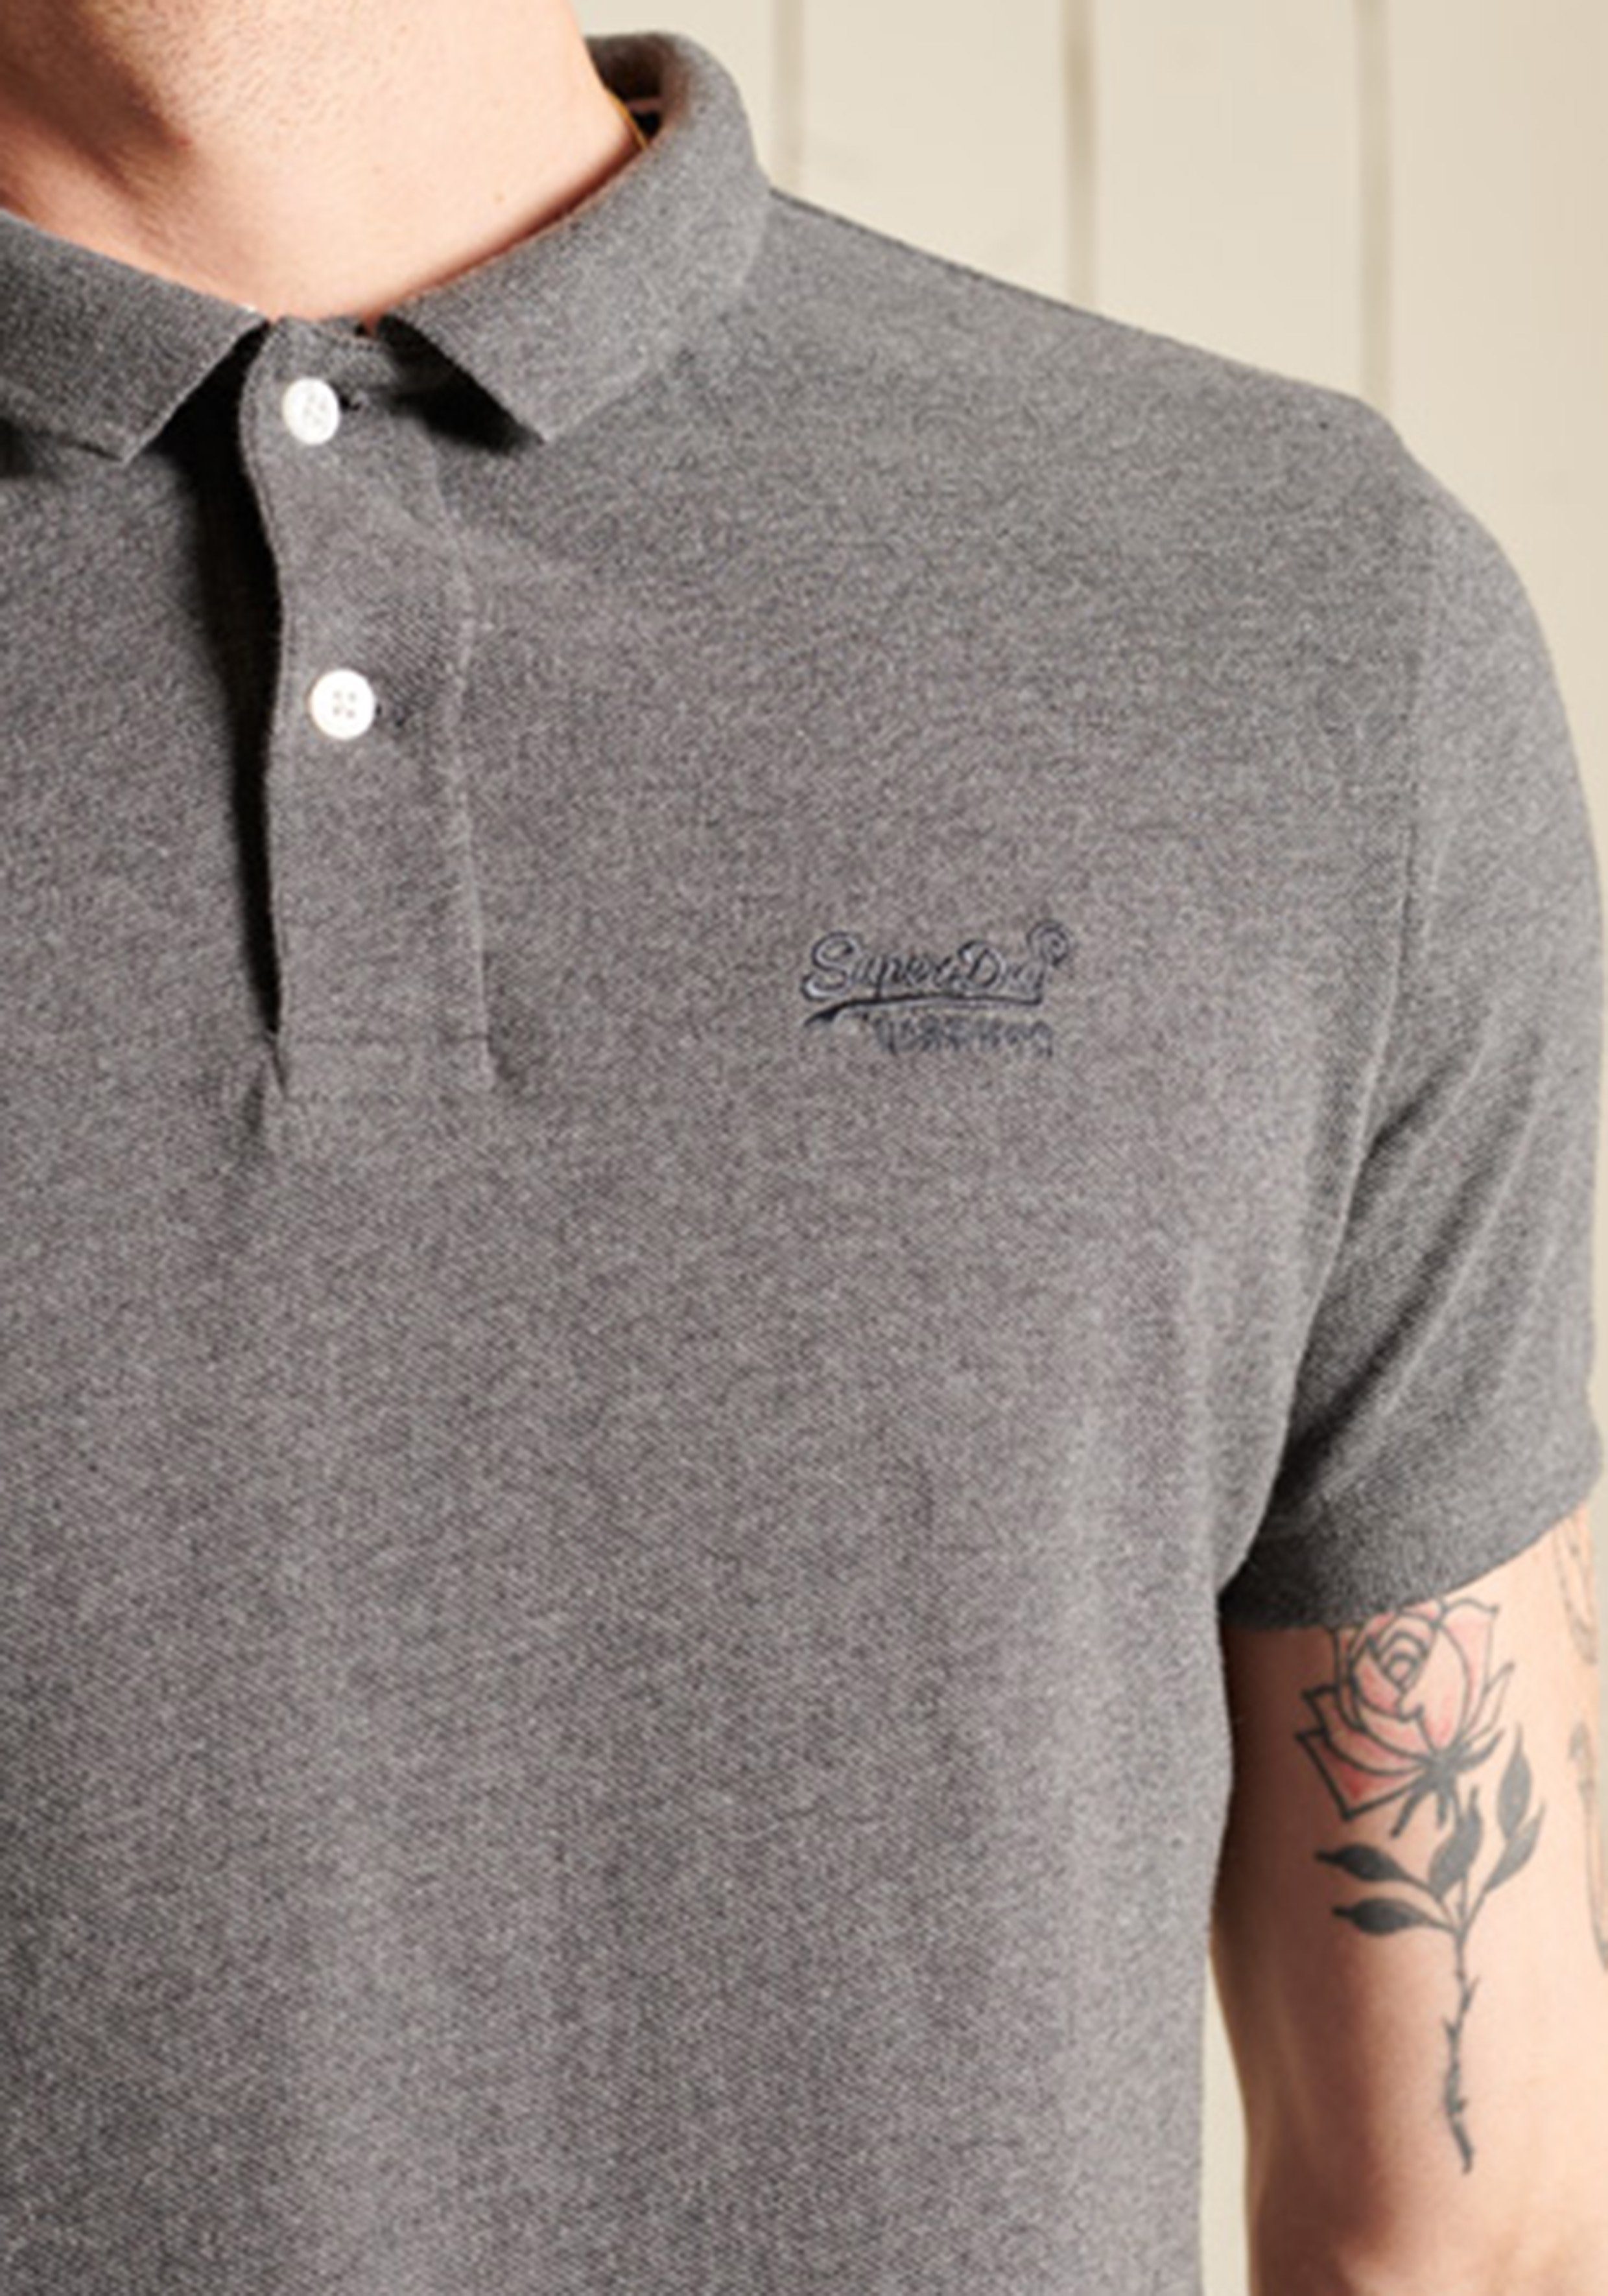 Superdry Poloshirt CLASSIC marl PIQUE charcoal POLO rich